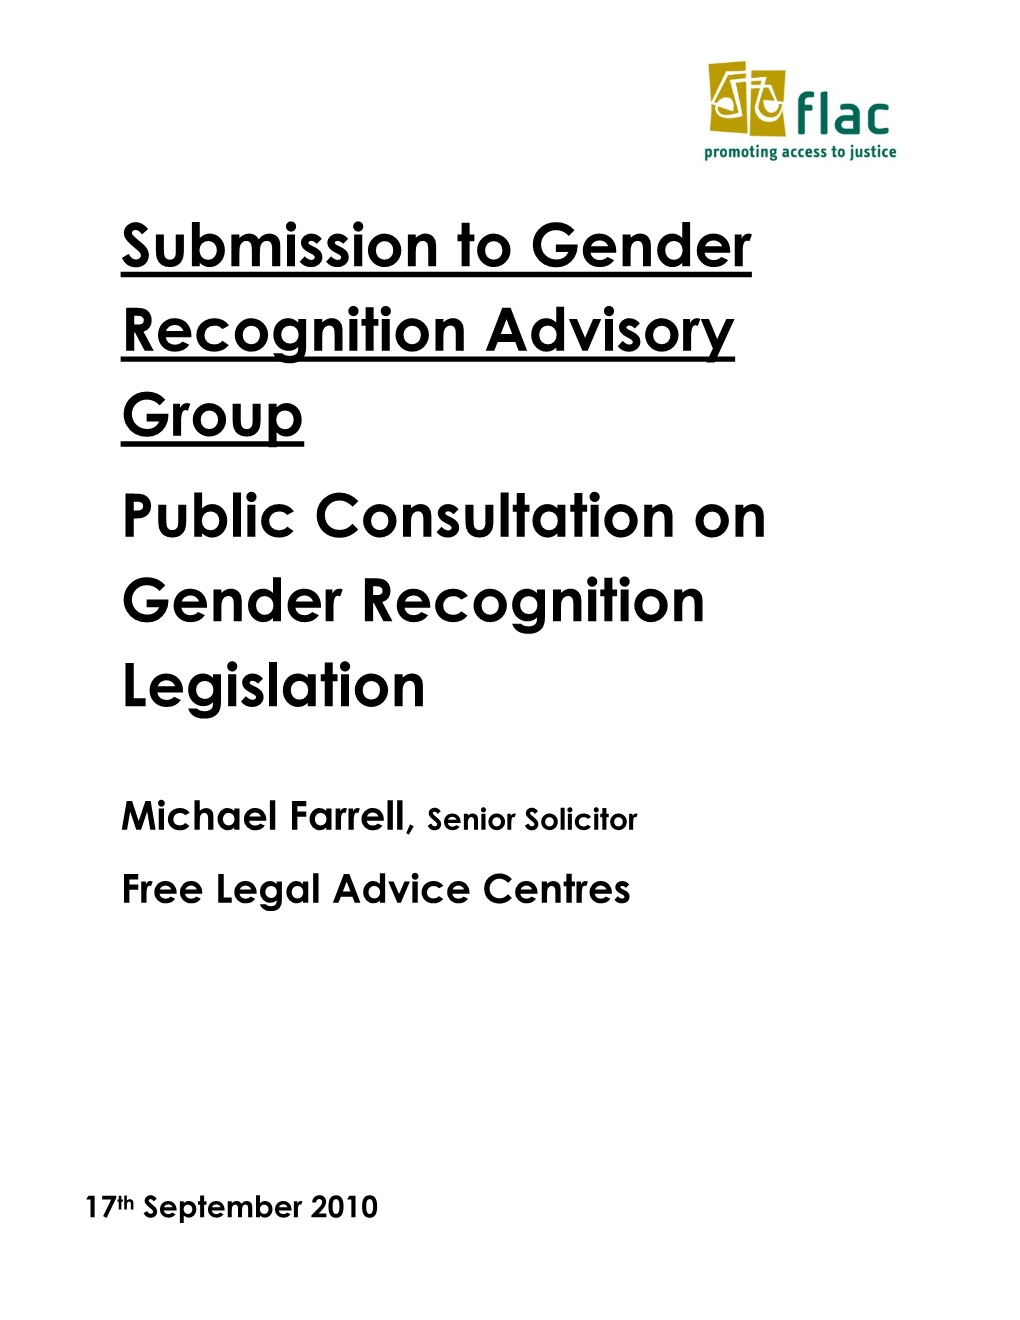 Submission to Gender Recognition Advisory Group Public Consultation on Gender Recognition Legislation